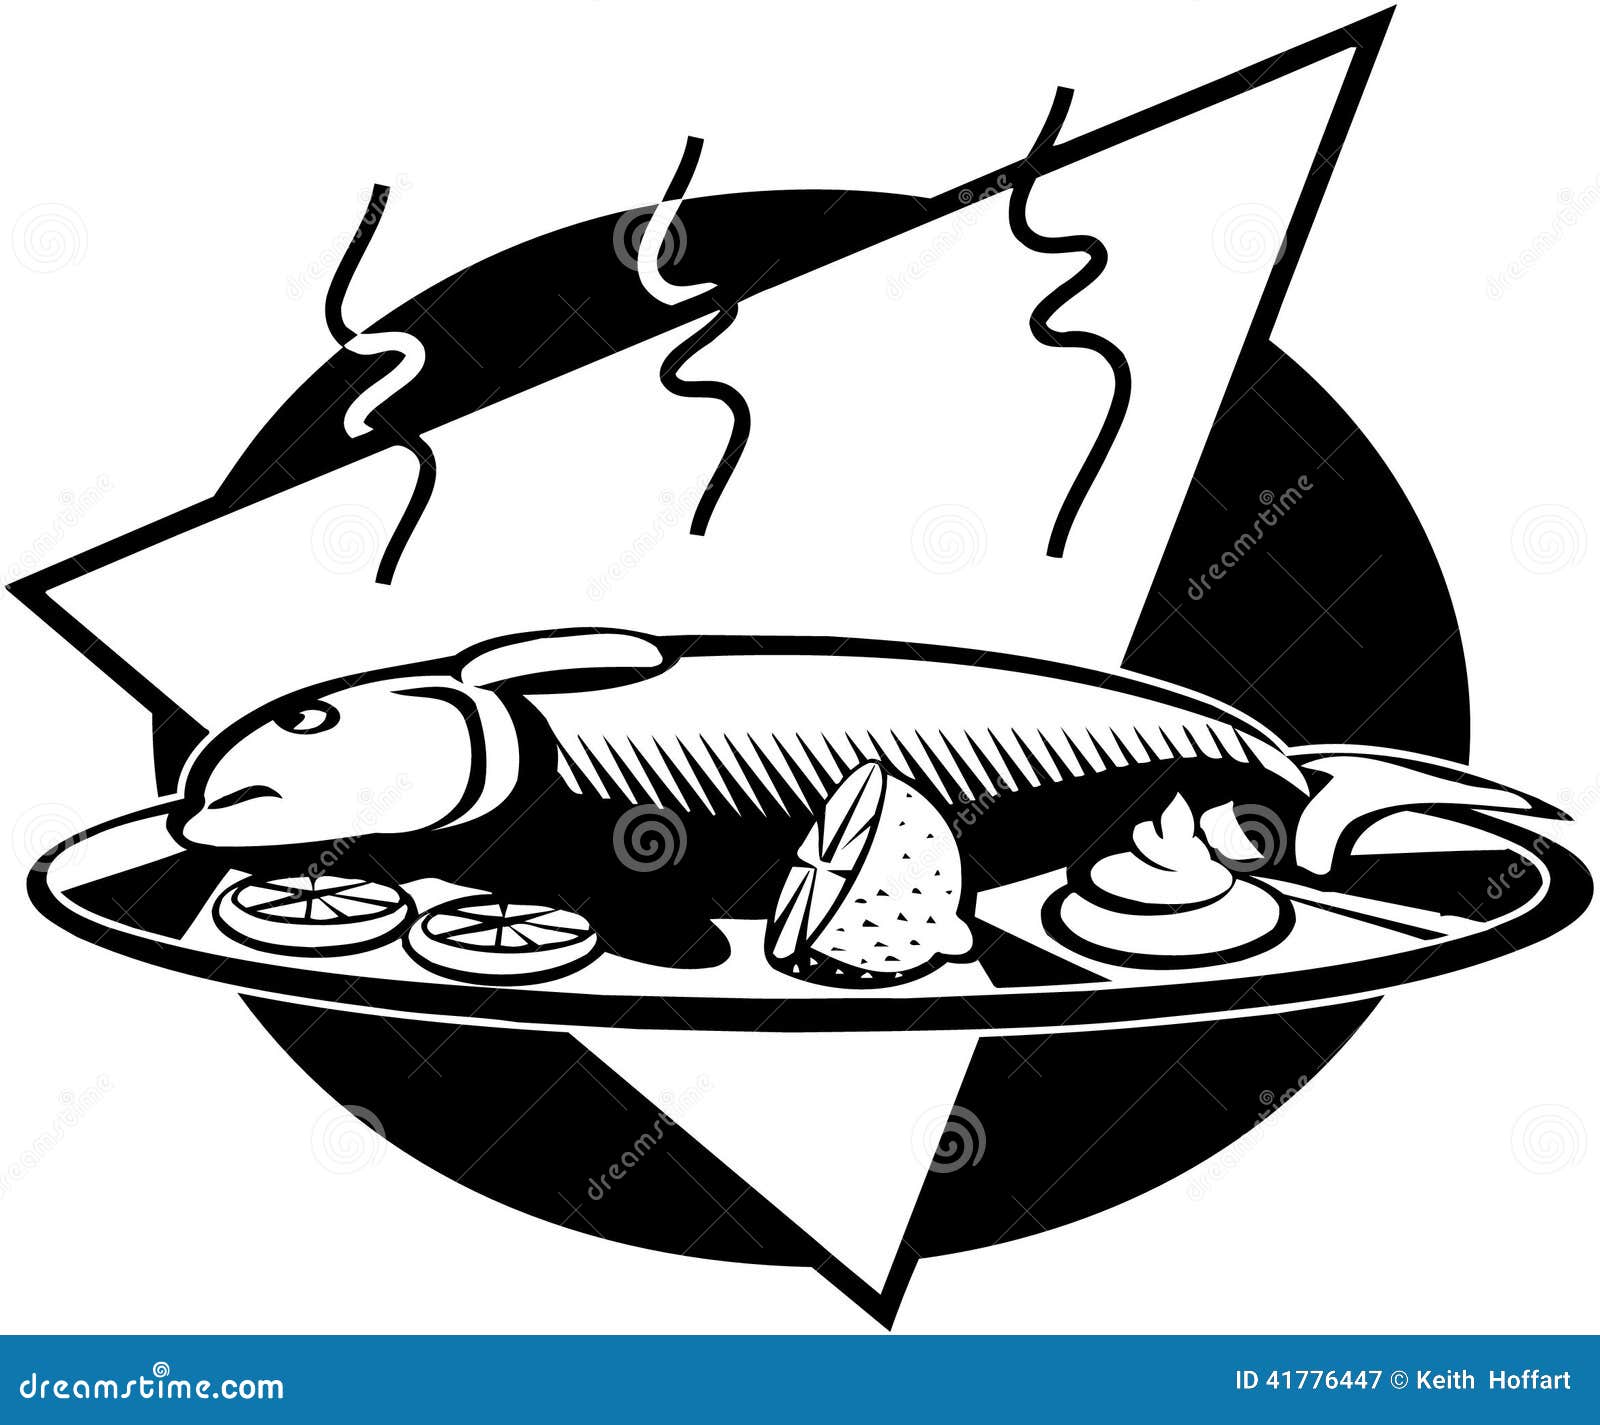 fish plate clipart - photo #32